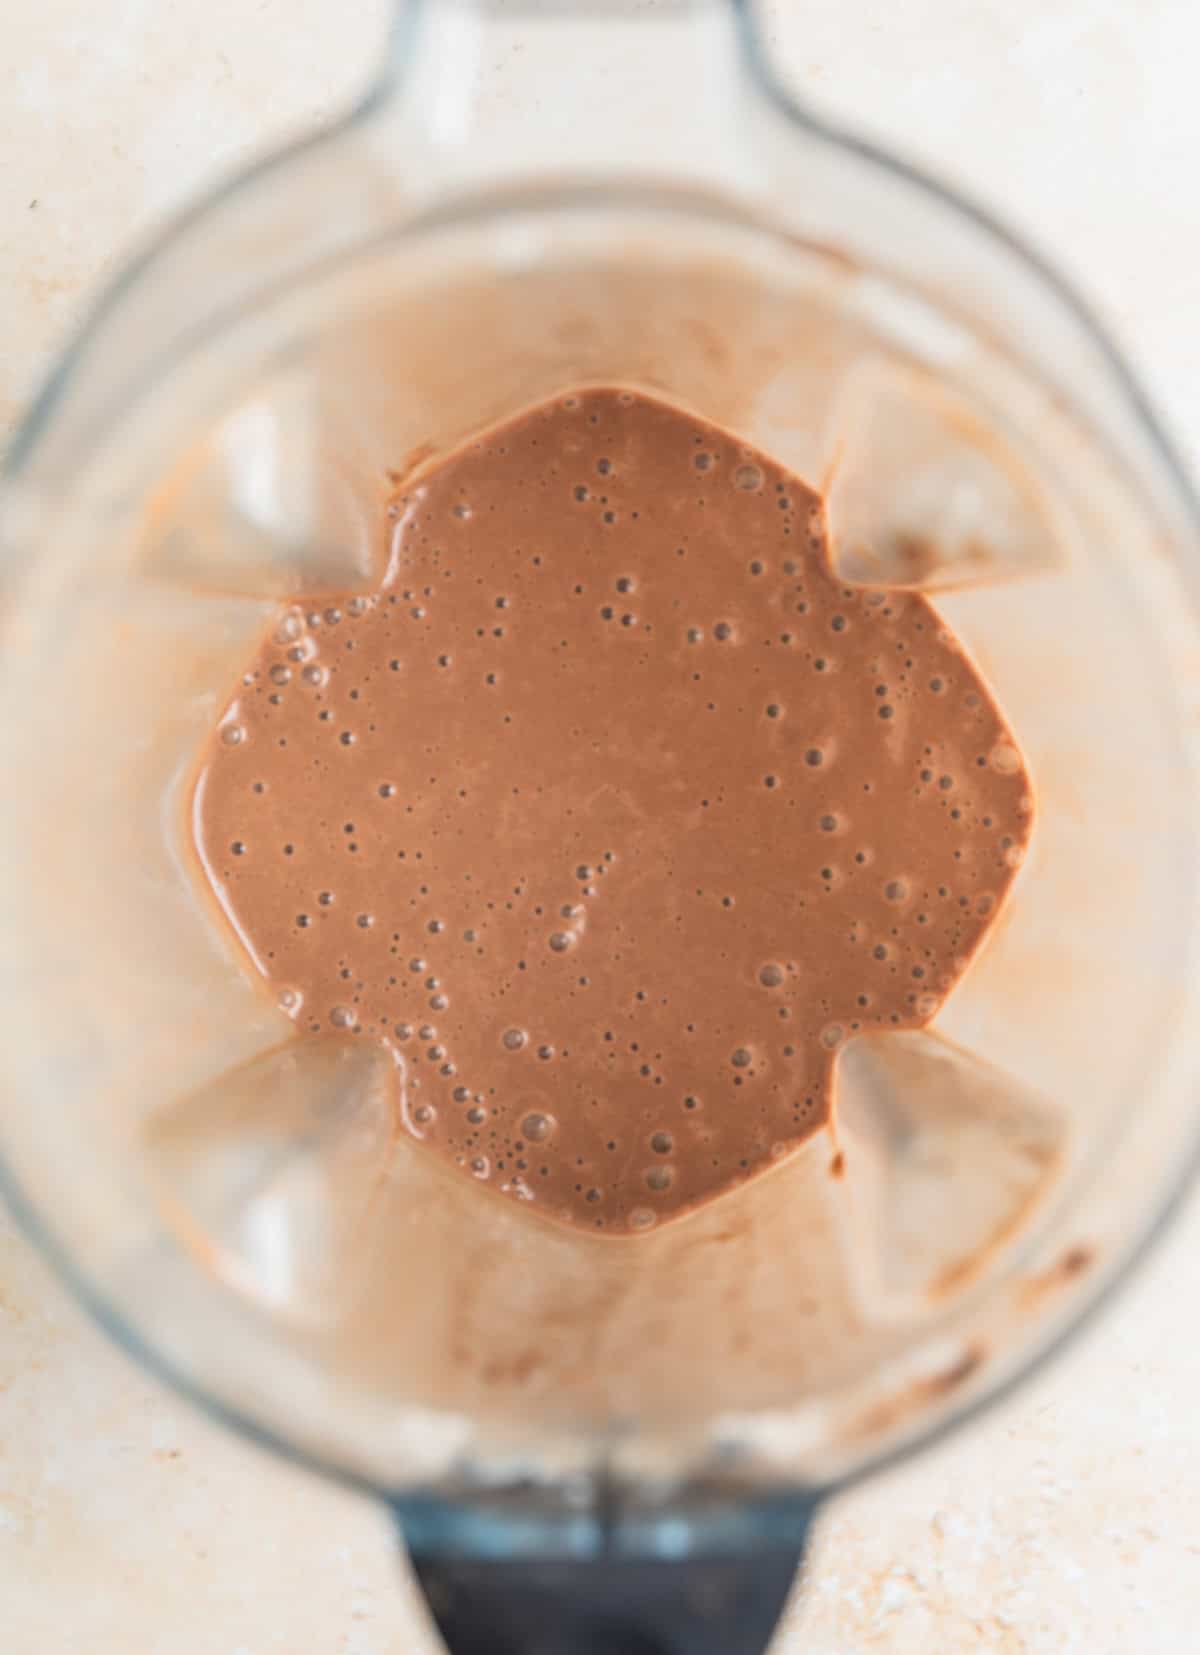 Blender containing peanut butter coffee smoothie.